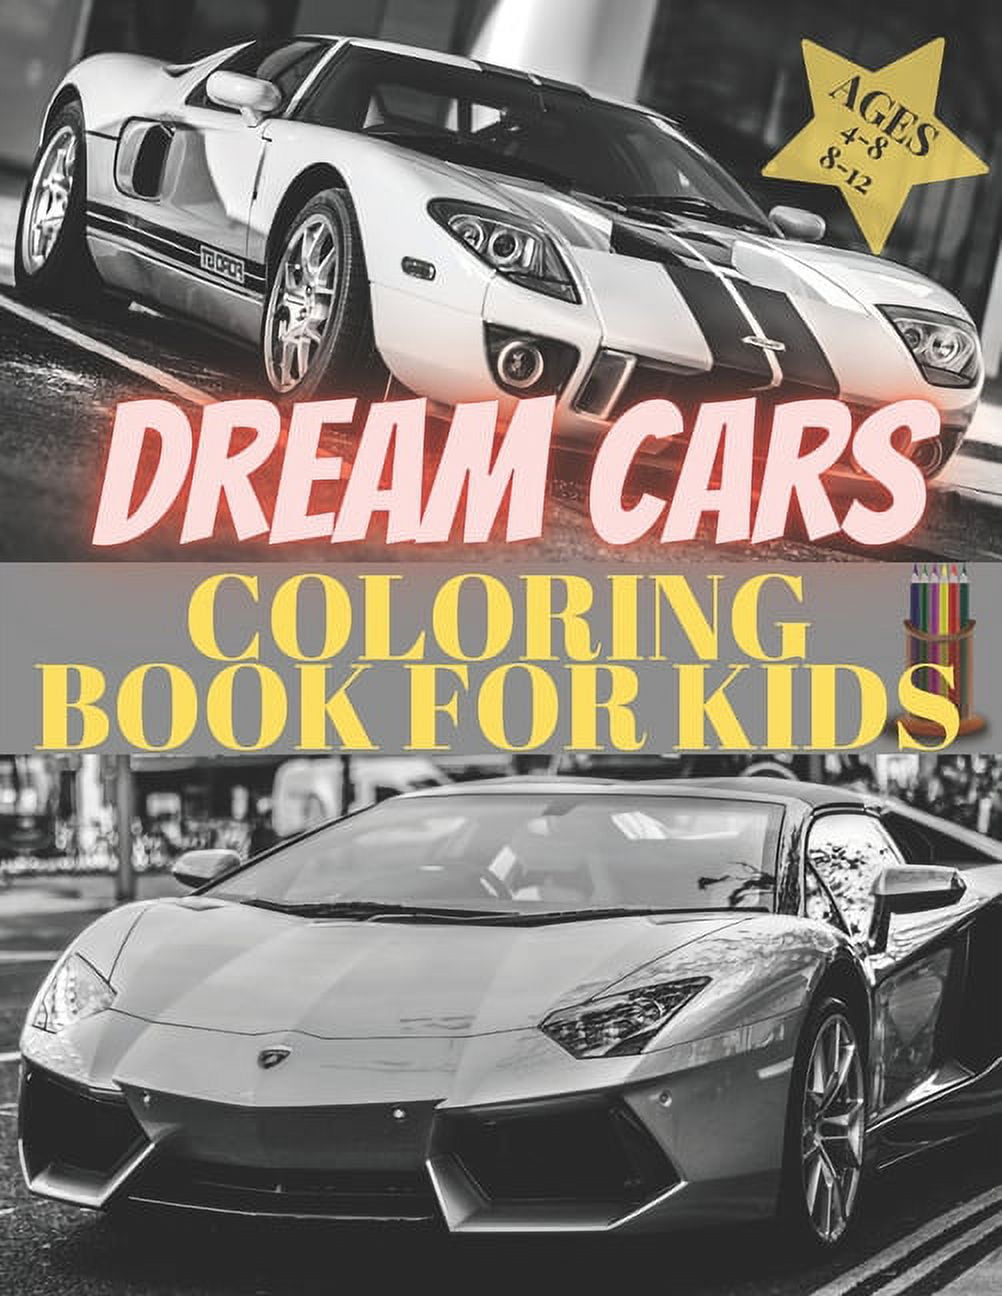 Supercar Coloring Book For Kids: Exotic Luxury Cars Colouring Book For Kids  Ages 8-12. Stress Relief And Relaxation (Paperback), Napa Bookmine